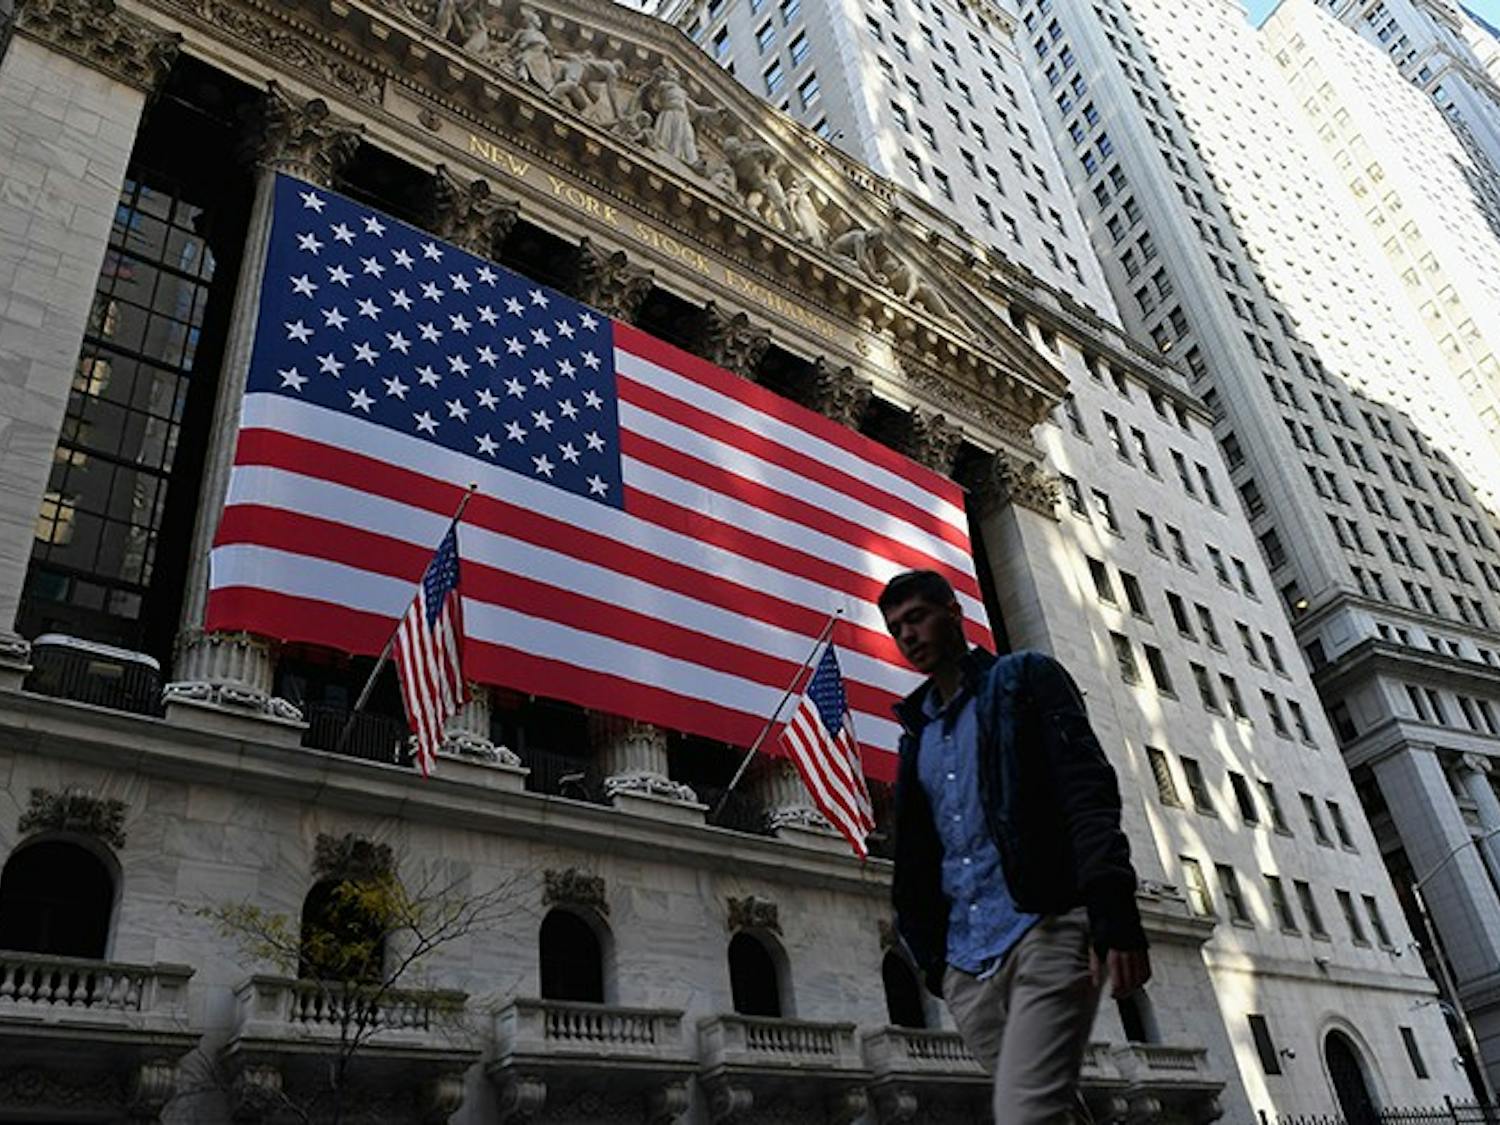 The New York Stock Exchange is located on Wall Street in New York City. It is the largest stock exchange in the world.